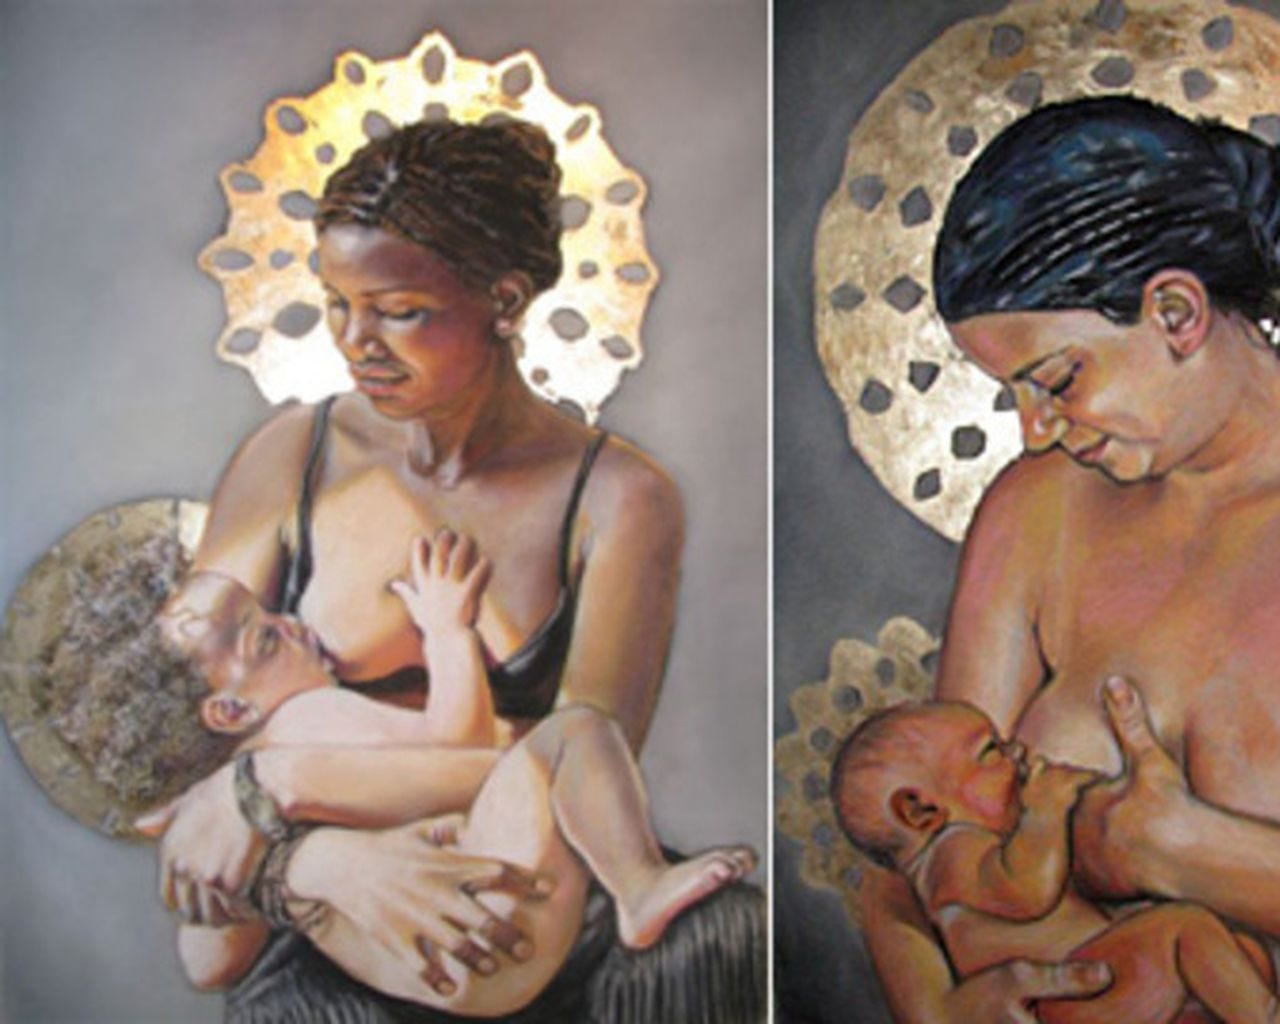 Facebook furor as nursing mother paintings censored | The Star